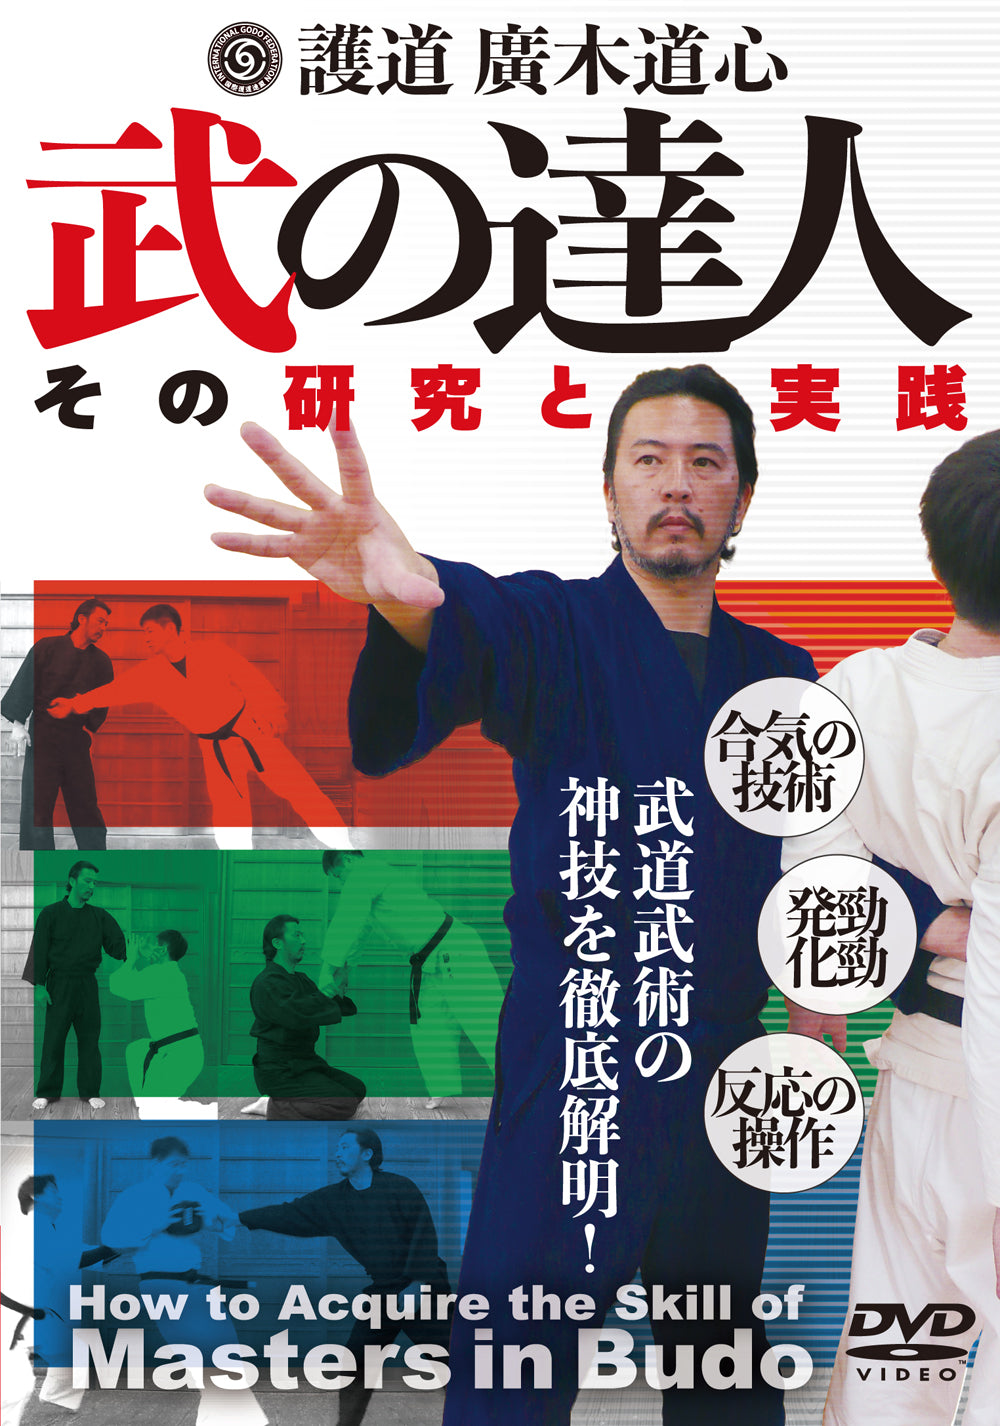 How to Acquire the Skill of Masters in Budo DVD by Hiroki Doshin - Budovideos Inc